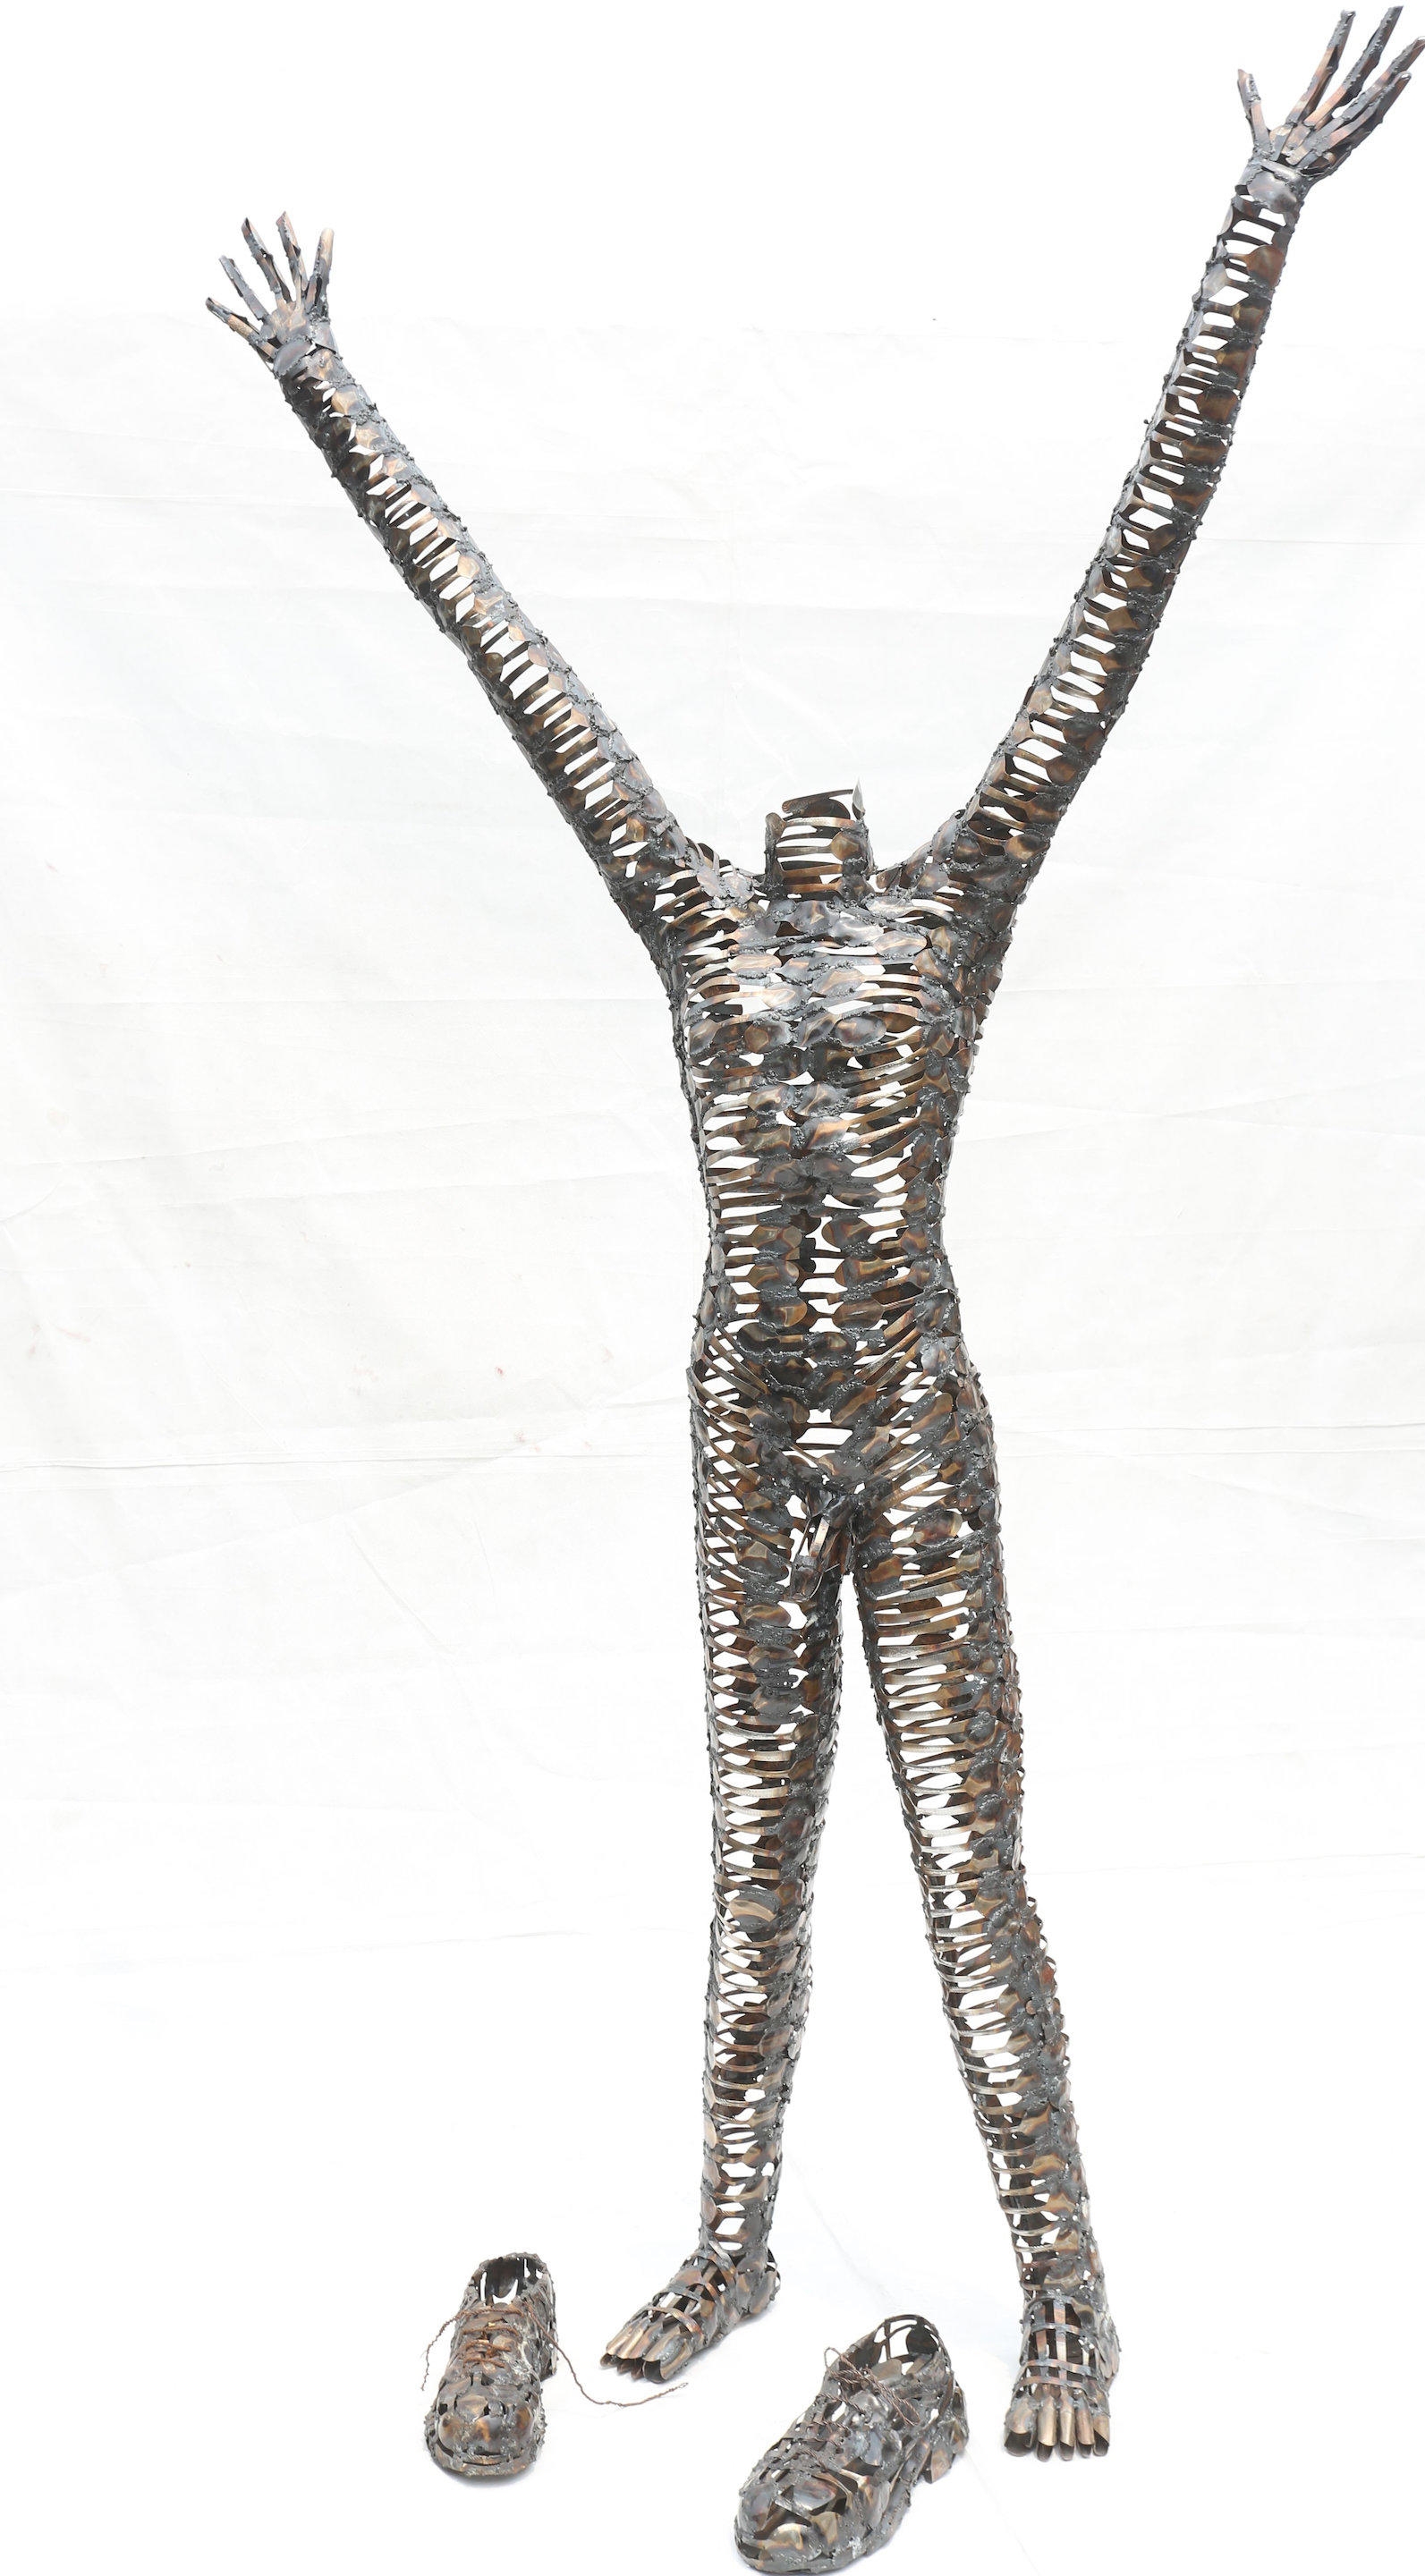 Artwork by Freddy Tsimba, Centre fermé, rêve ouvert, Made of welded spoons and recovered metal